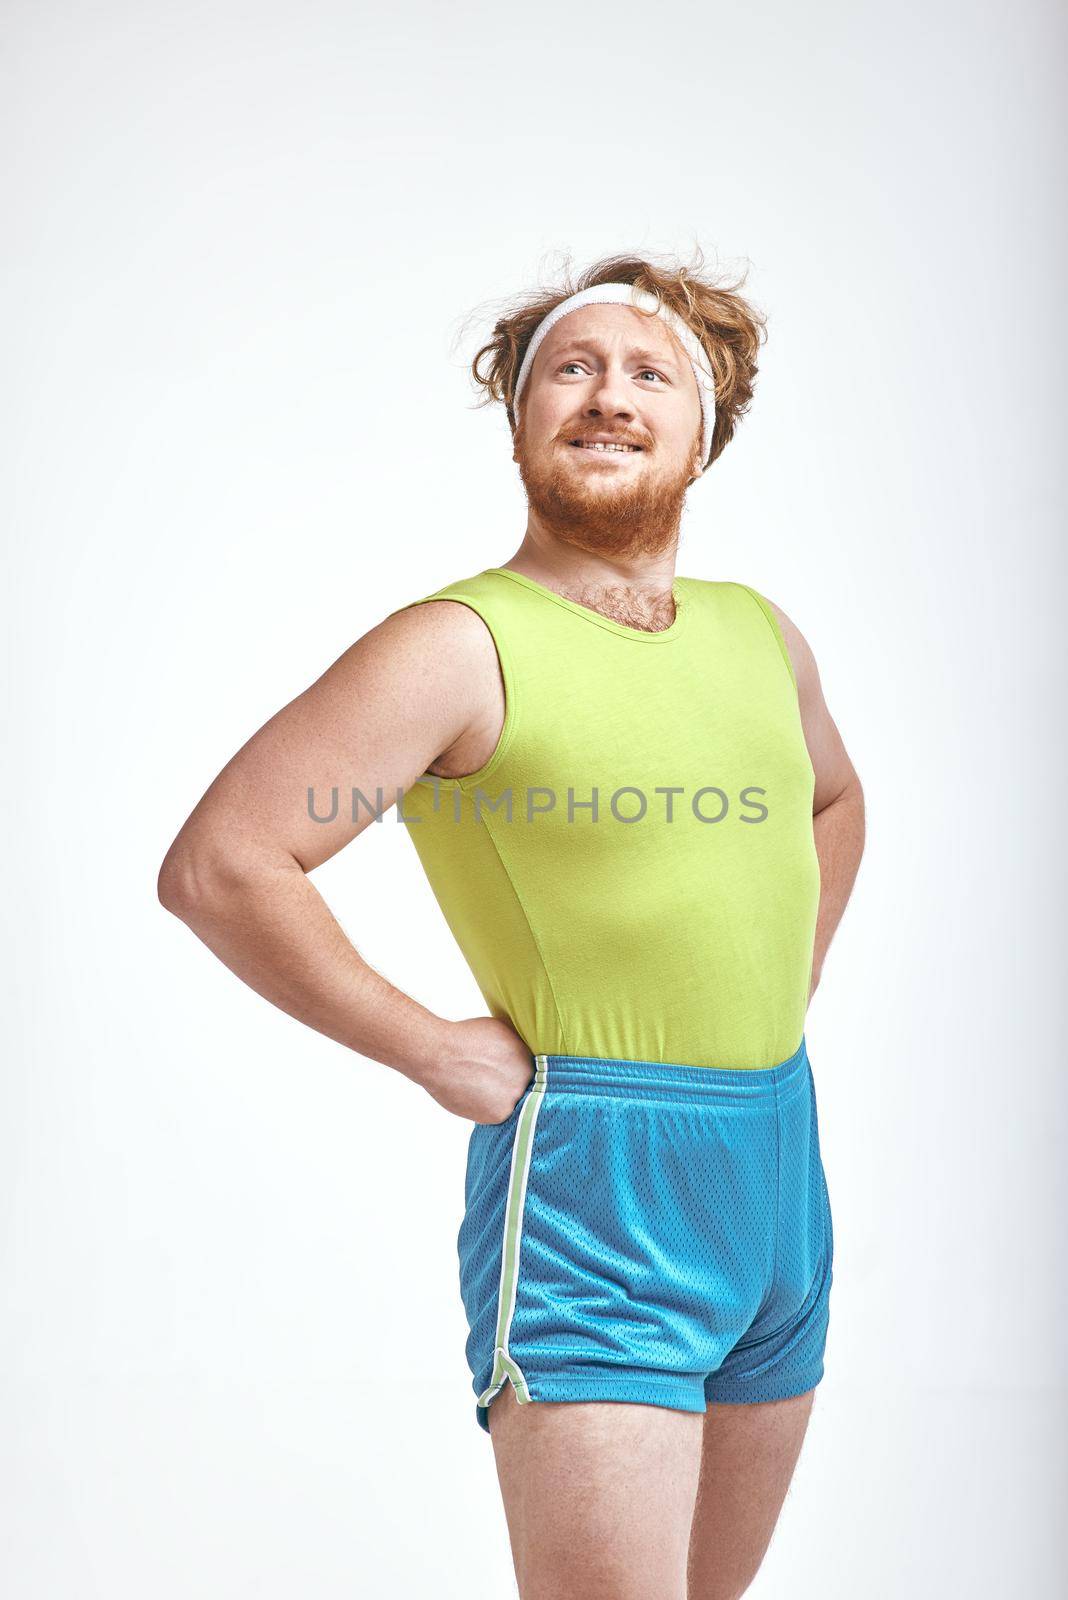 Funny picture of red haired, bearded, plump man on white background. Man wearing sportswear